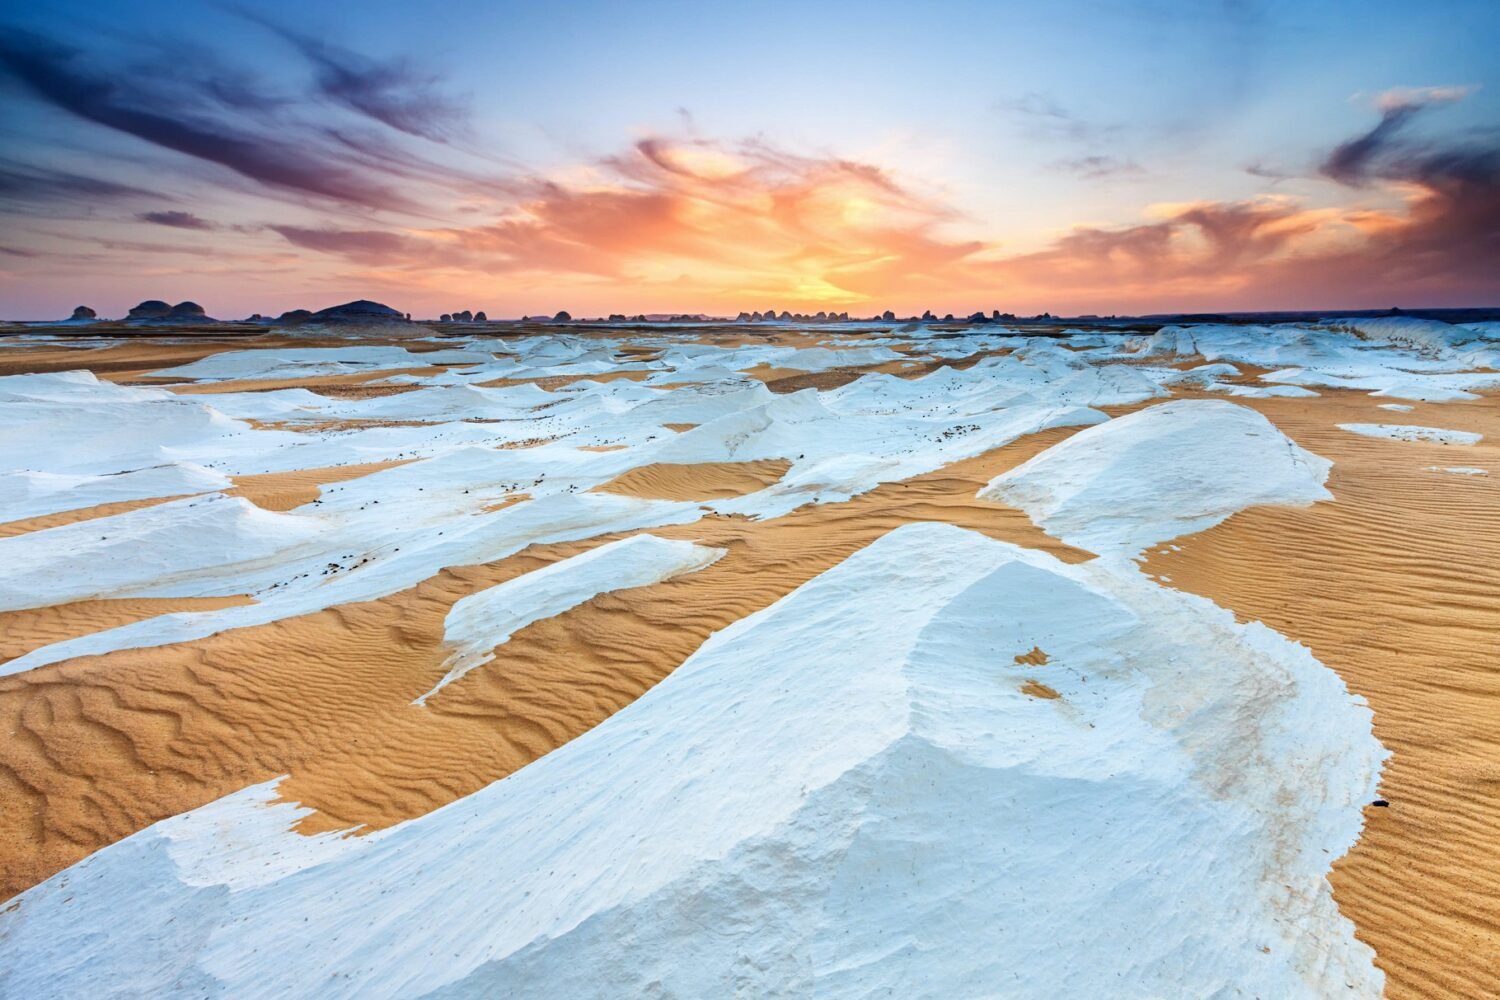 White Desert Expedition: A 3-Day Tour From Cairo